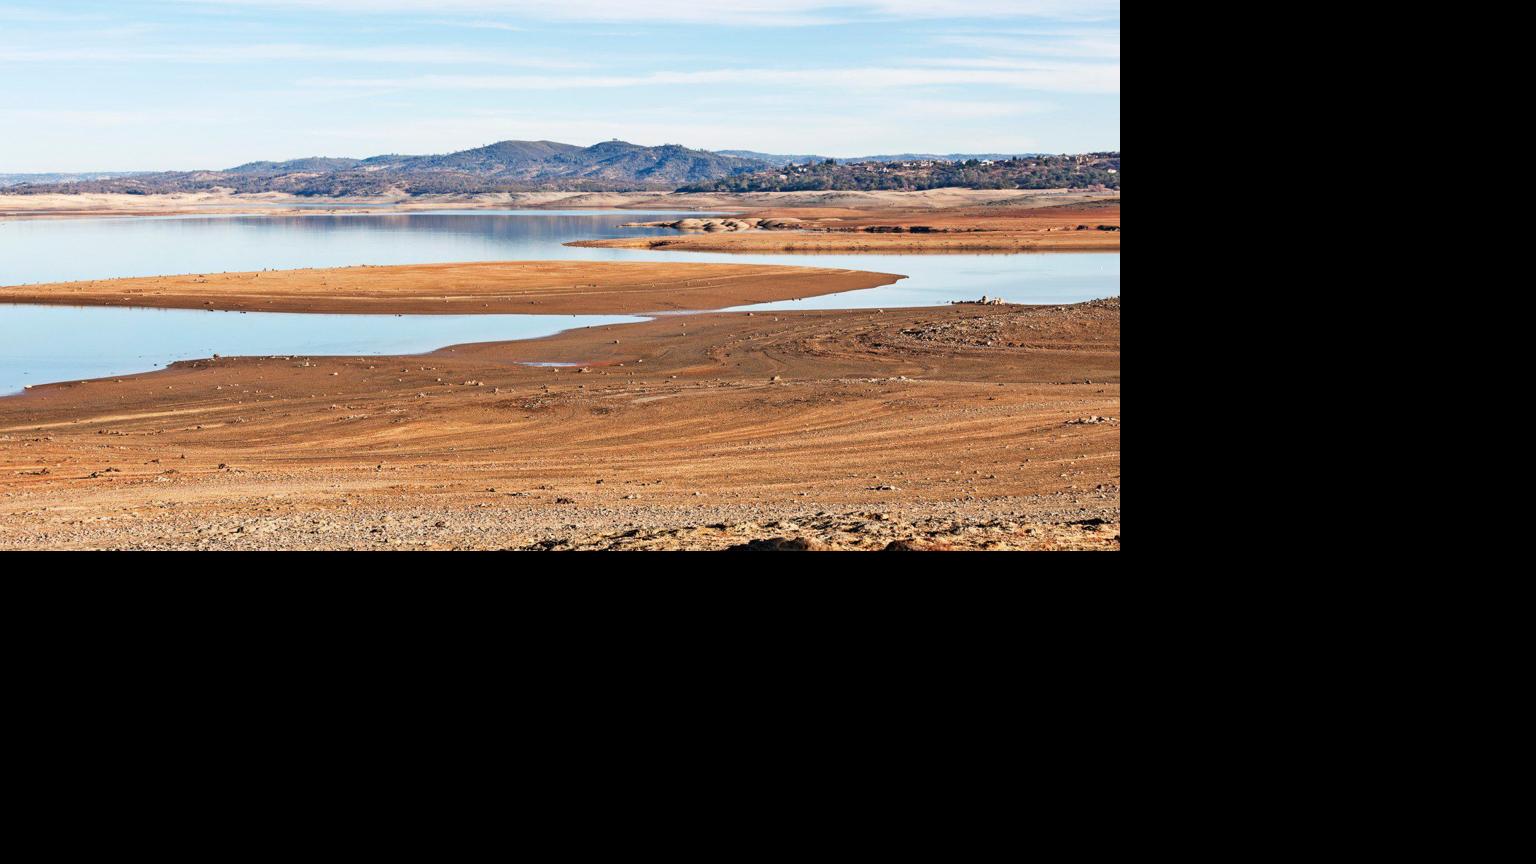 It's time to get serious about water crisis | Dan Walters - Santa Ynez Valley News